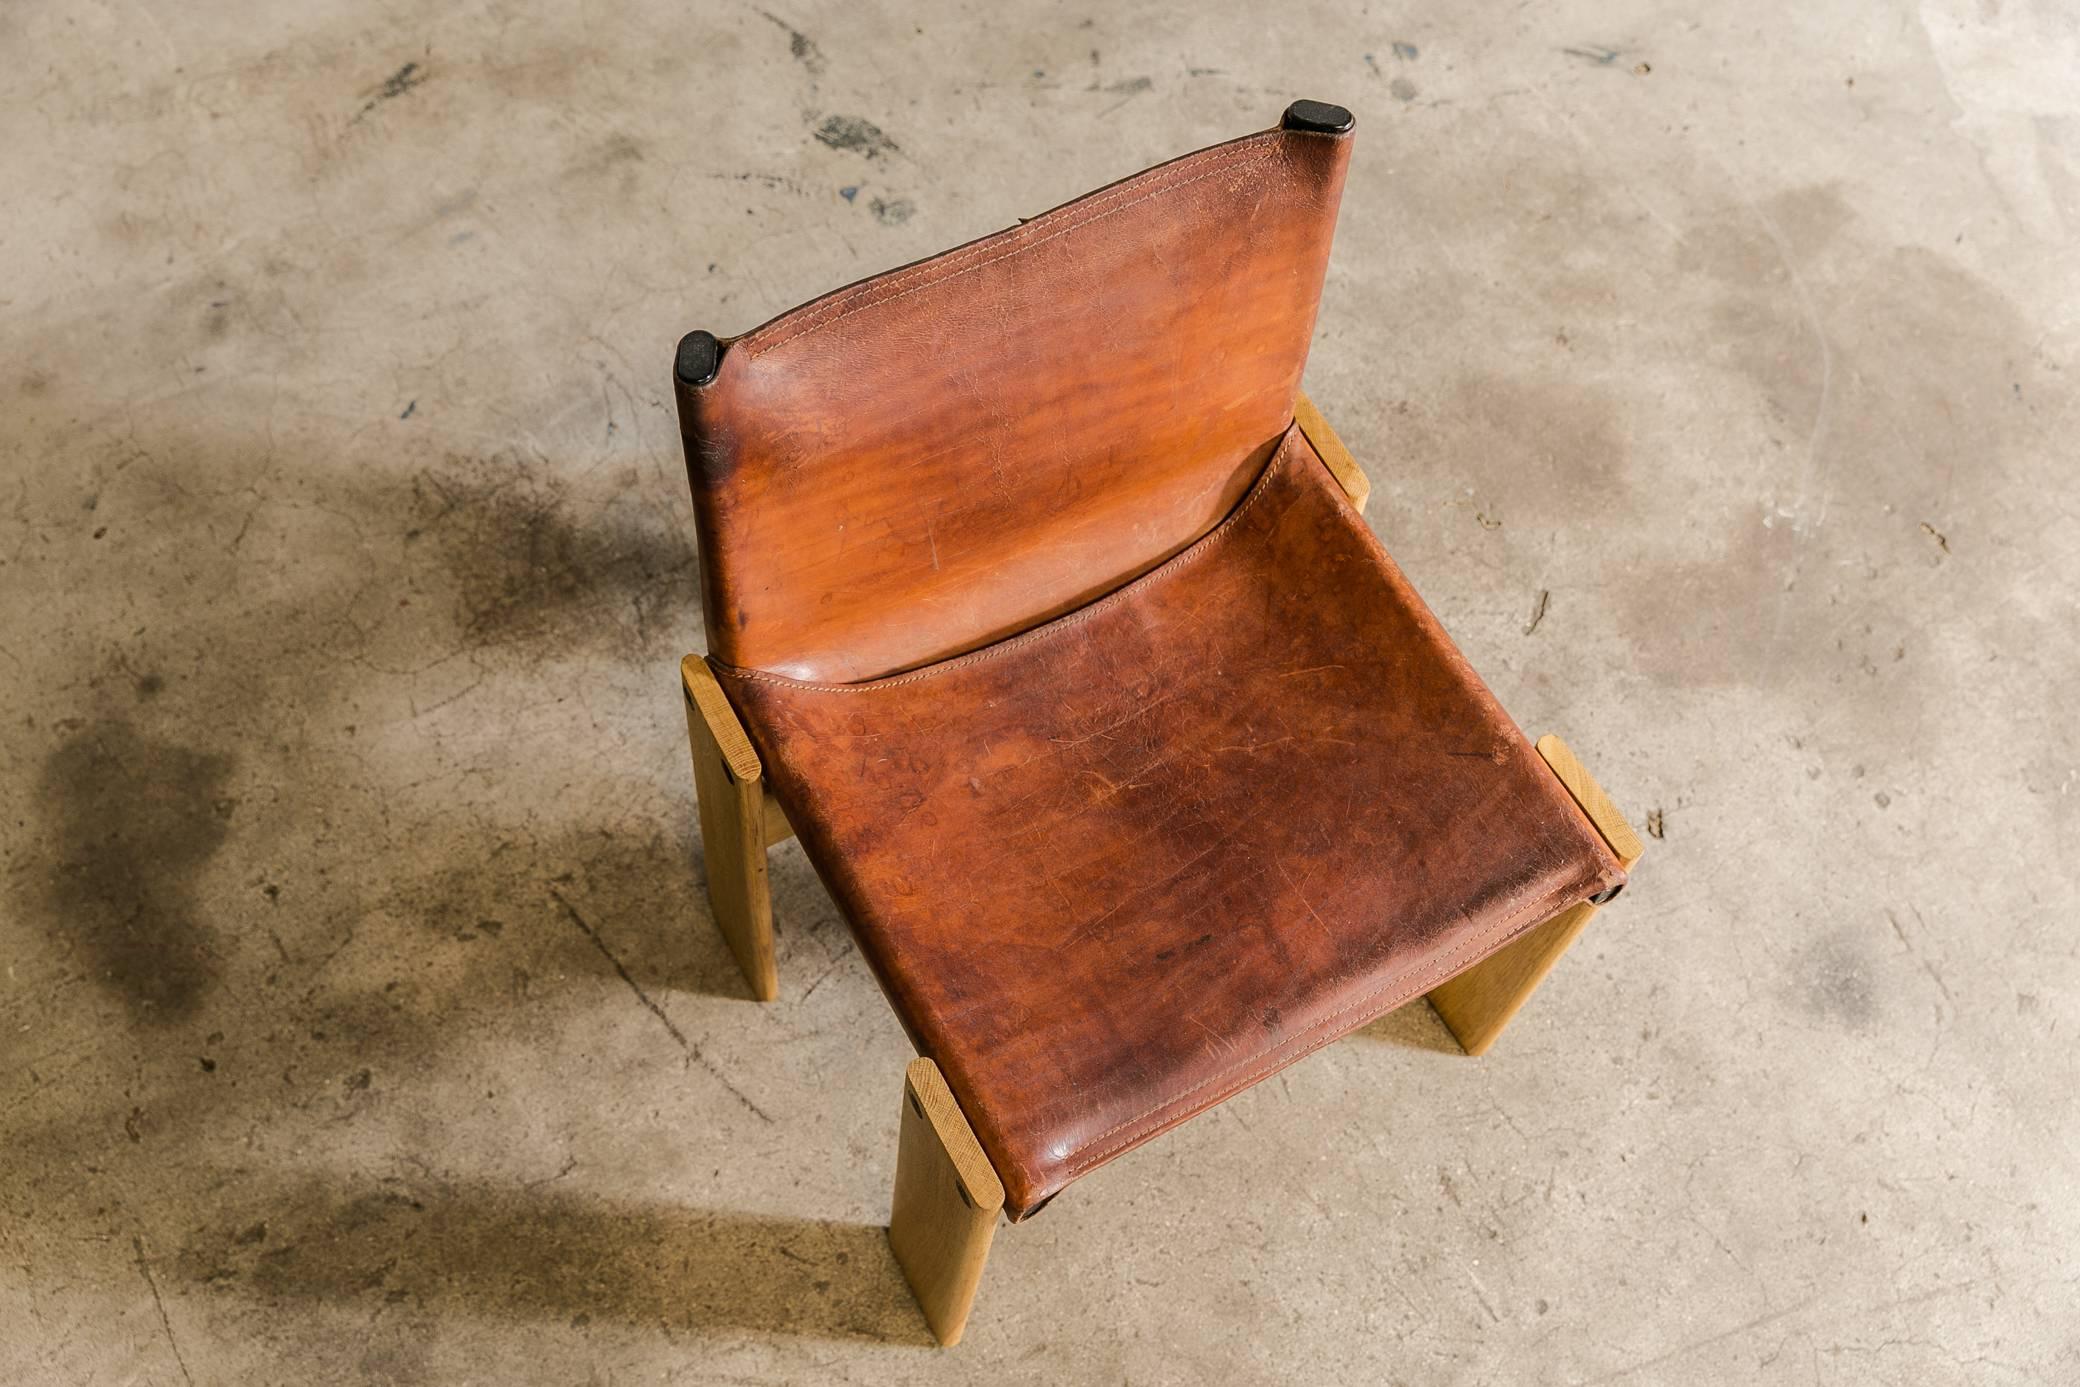 monk chairs sale